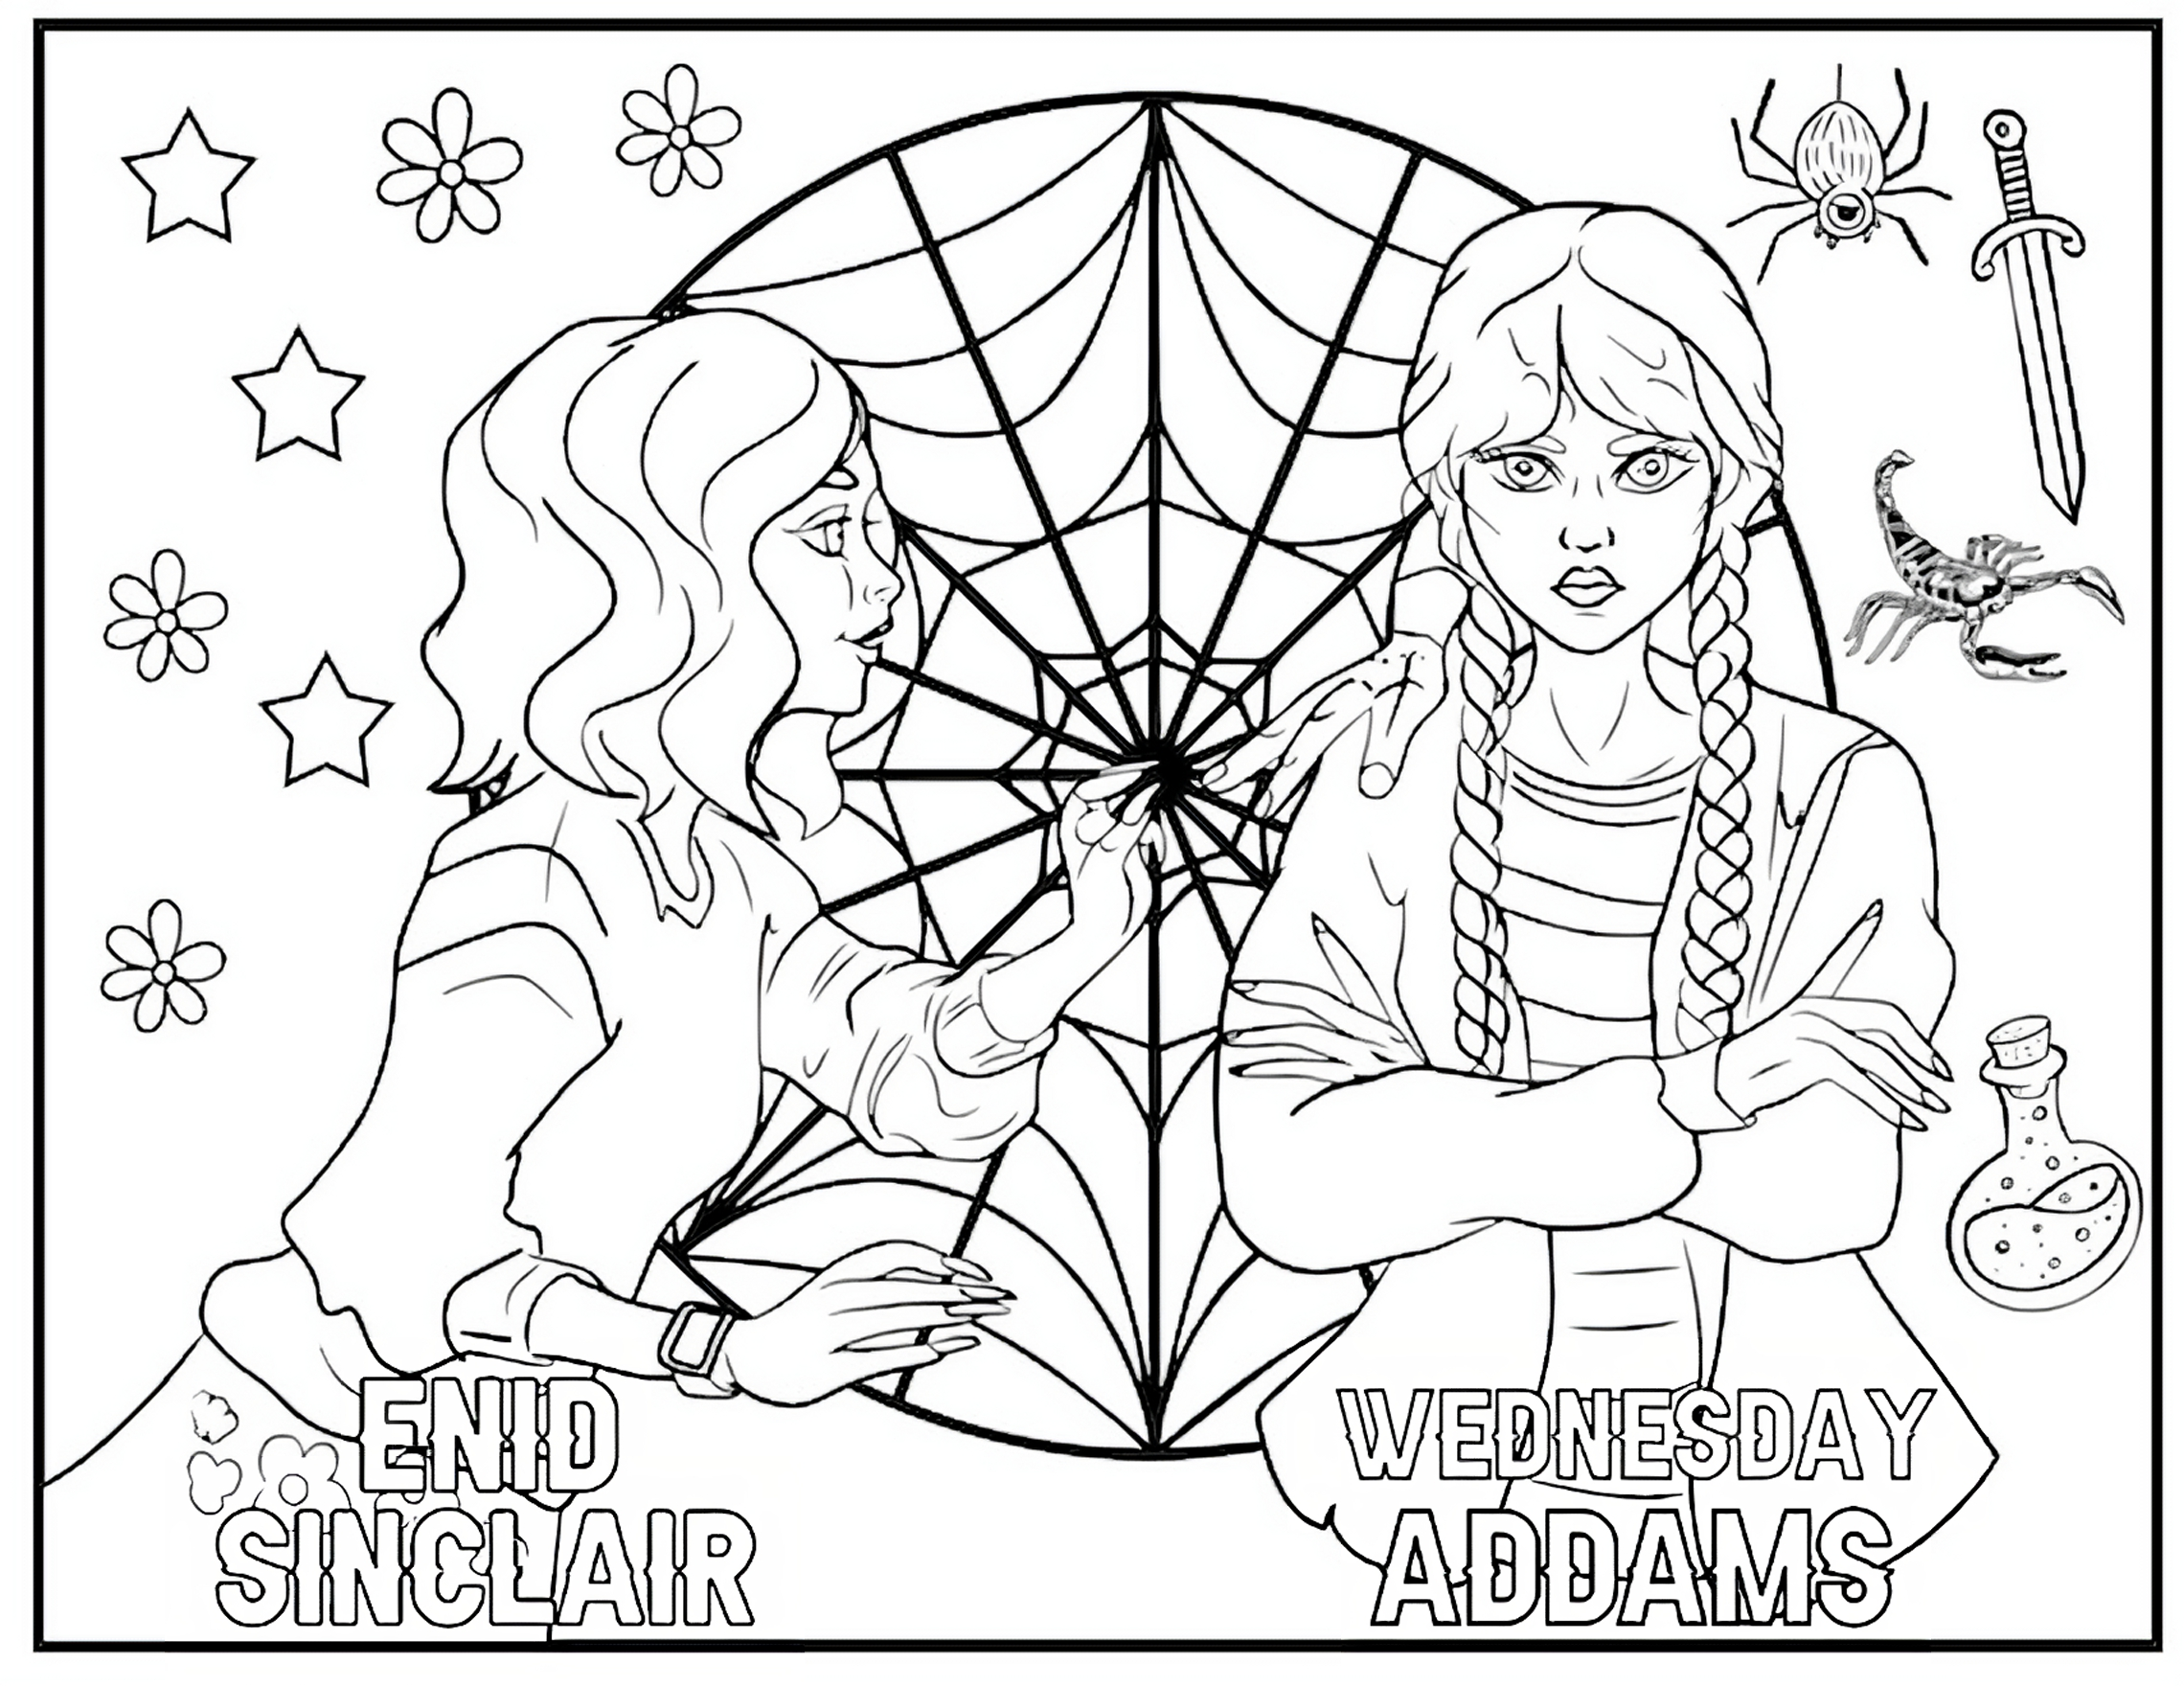 8 Wednesday Coloring Pages PDF Format - Etsy